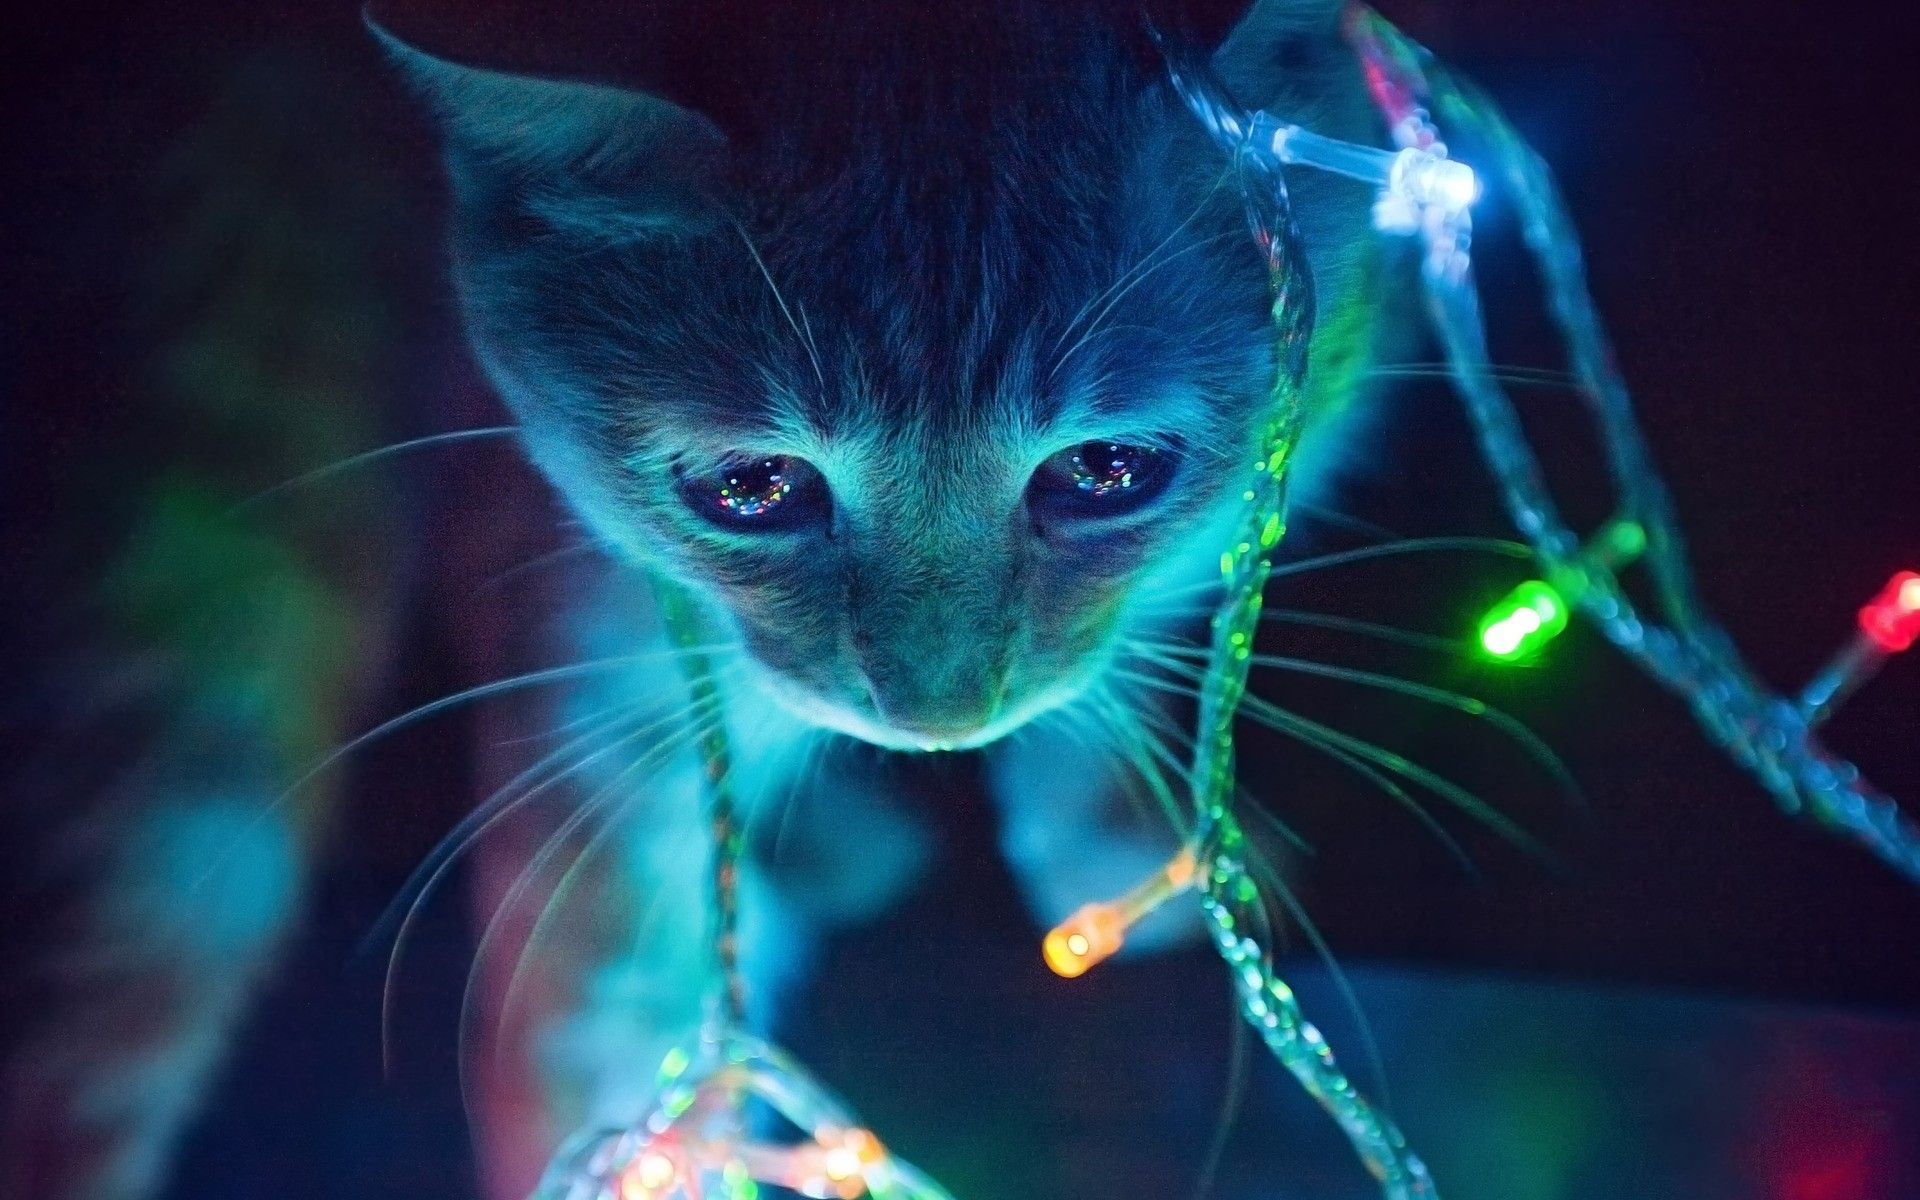 Christmas Lights and Cat (wallpaper) [1920x1080]